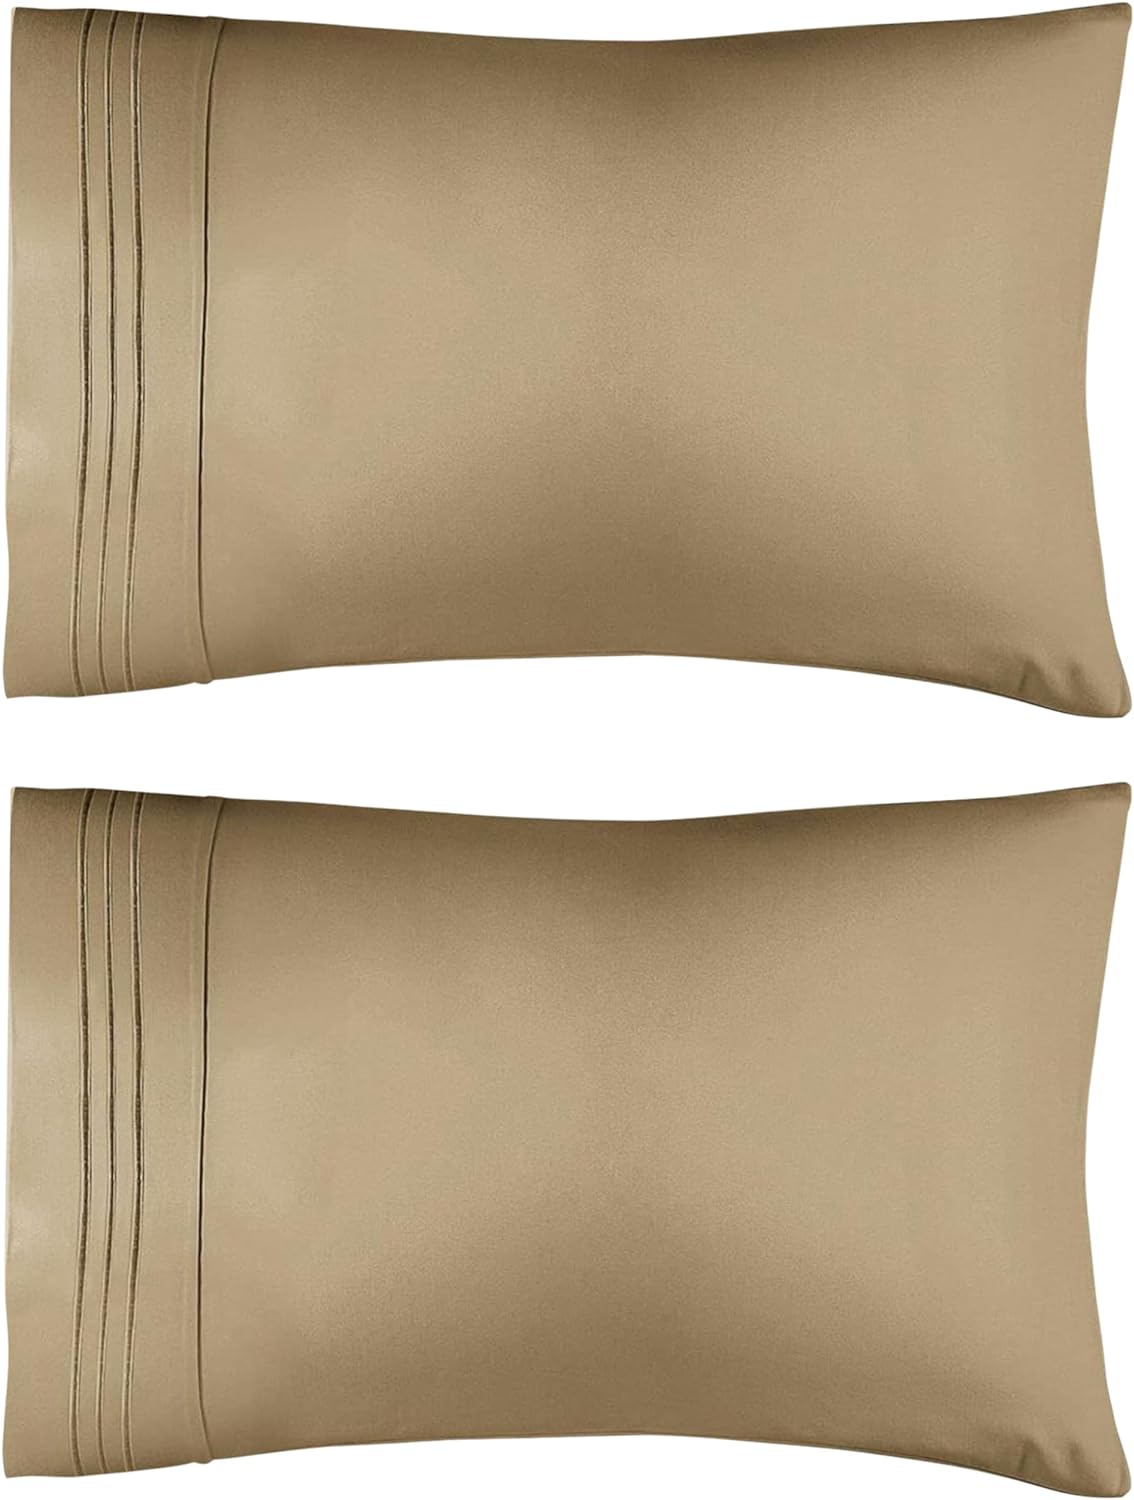 Queen Pillow Cases Set of 2 - Soft, Hotel Quality Pillowcase Covers - Comfy, Luxury Bedding for Women, Men, Kids & Teens - Machine Washable Pillow Protectors - 2 Piece - Queen Size Beige Pillow Cover